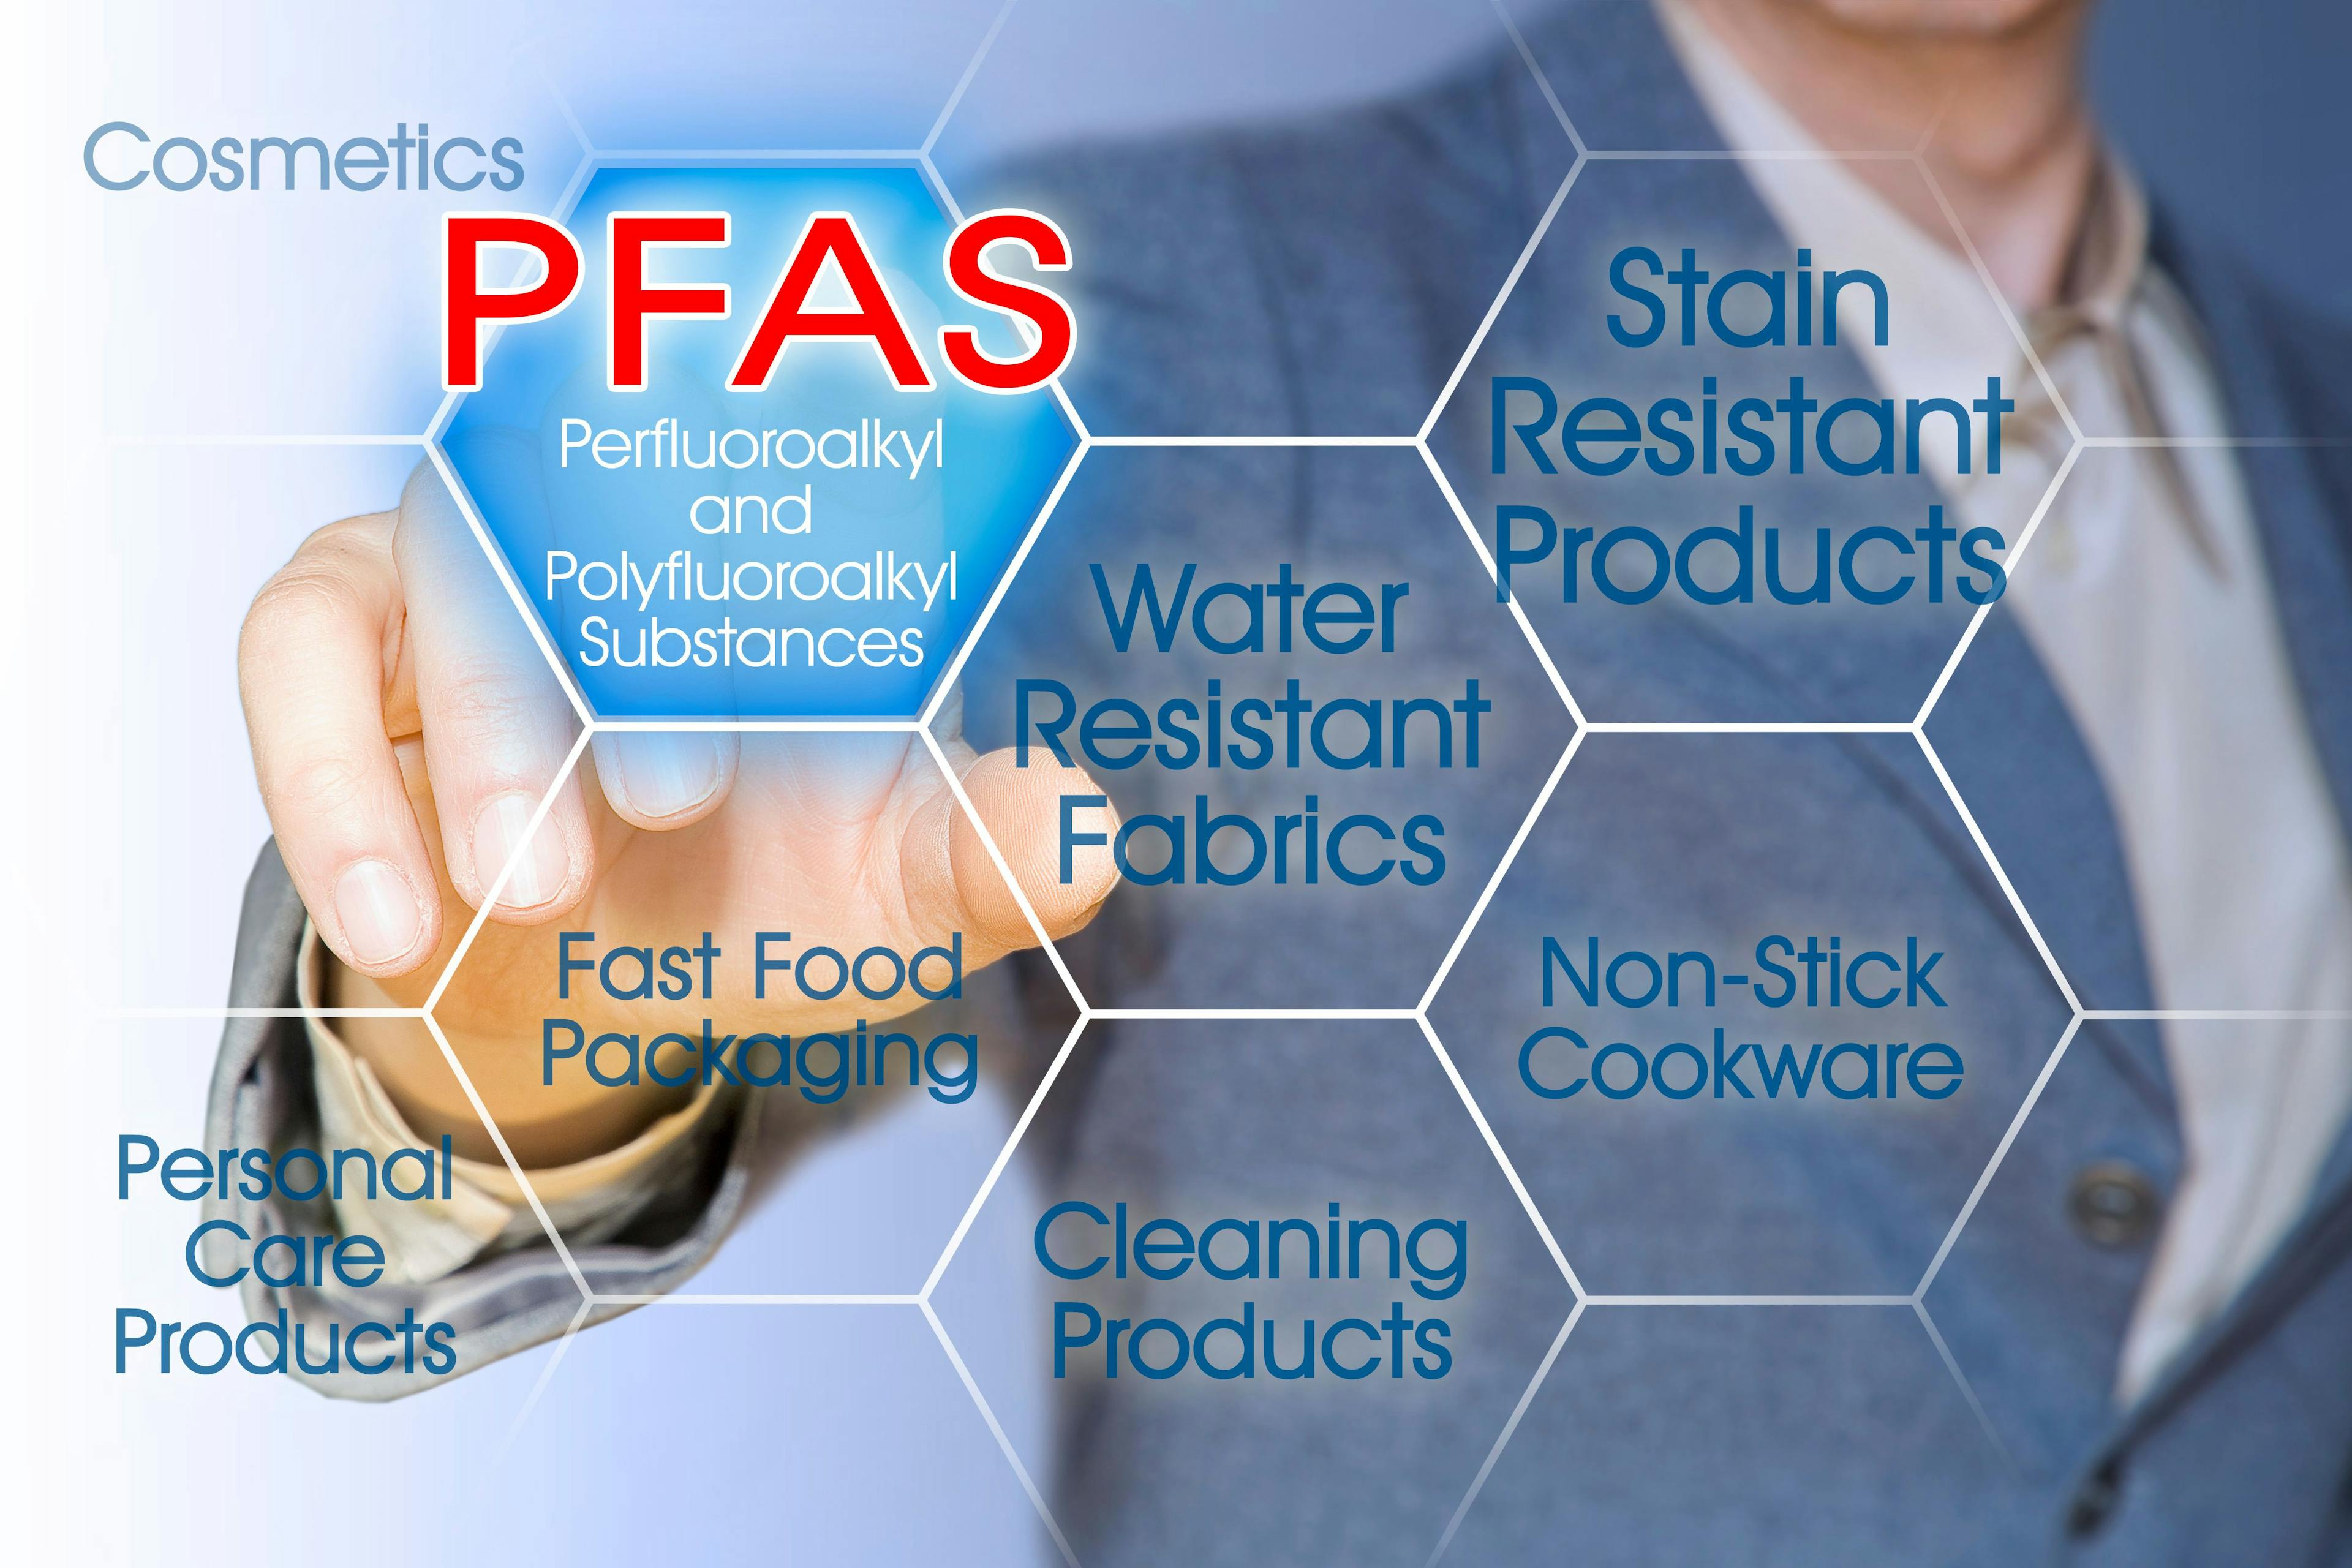 What is dangerous PFAS - Perfluoroalkyl and Polyfluoroalkyl Substances - and where is it found? | Image Credit: © Francesco Scatena - stock.adobe.com